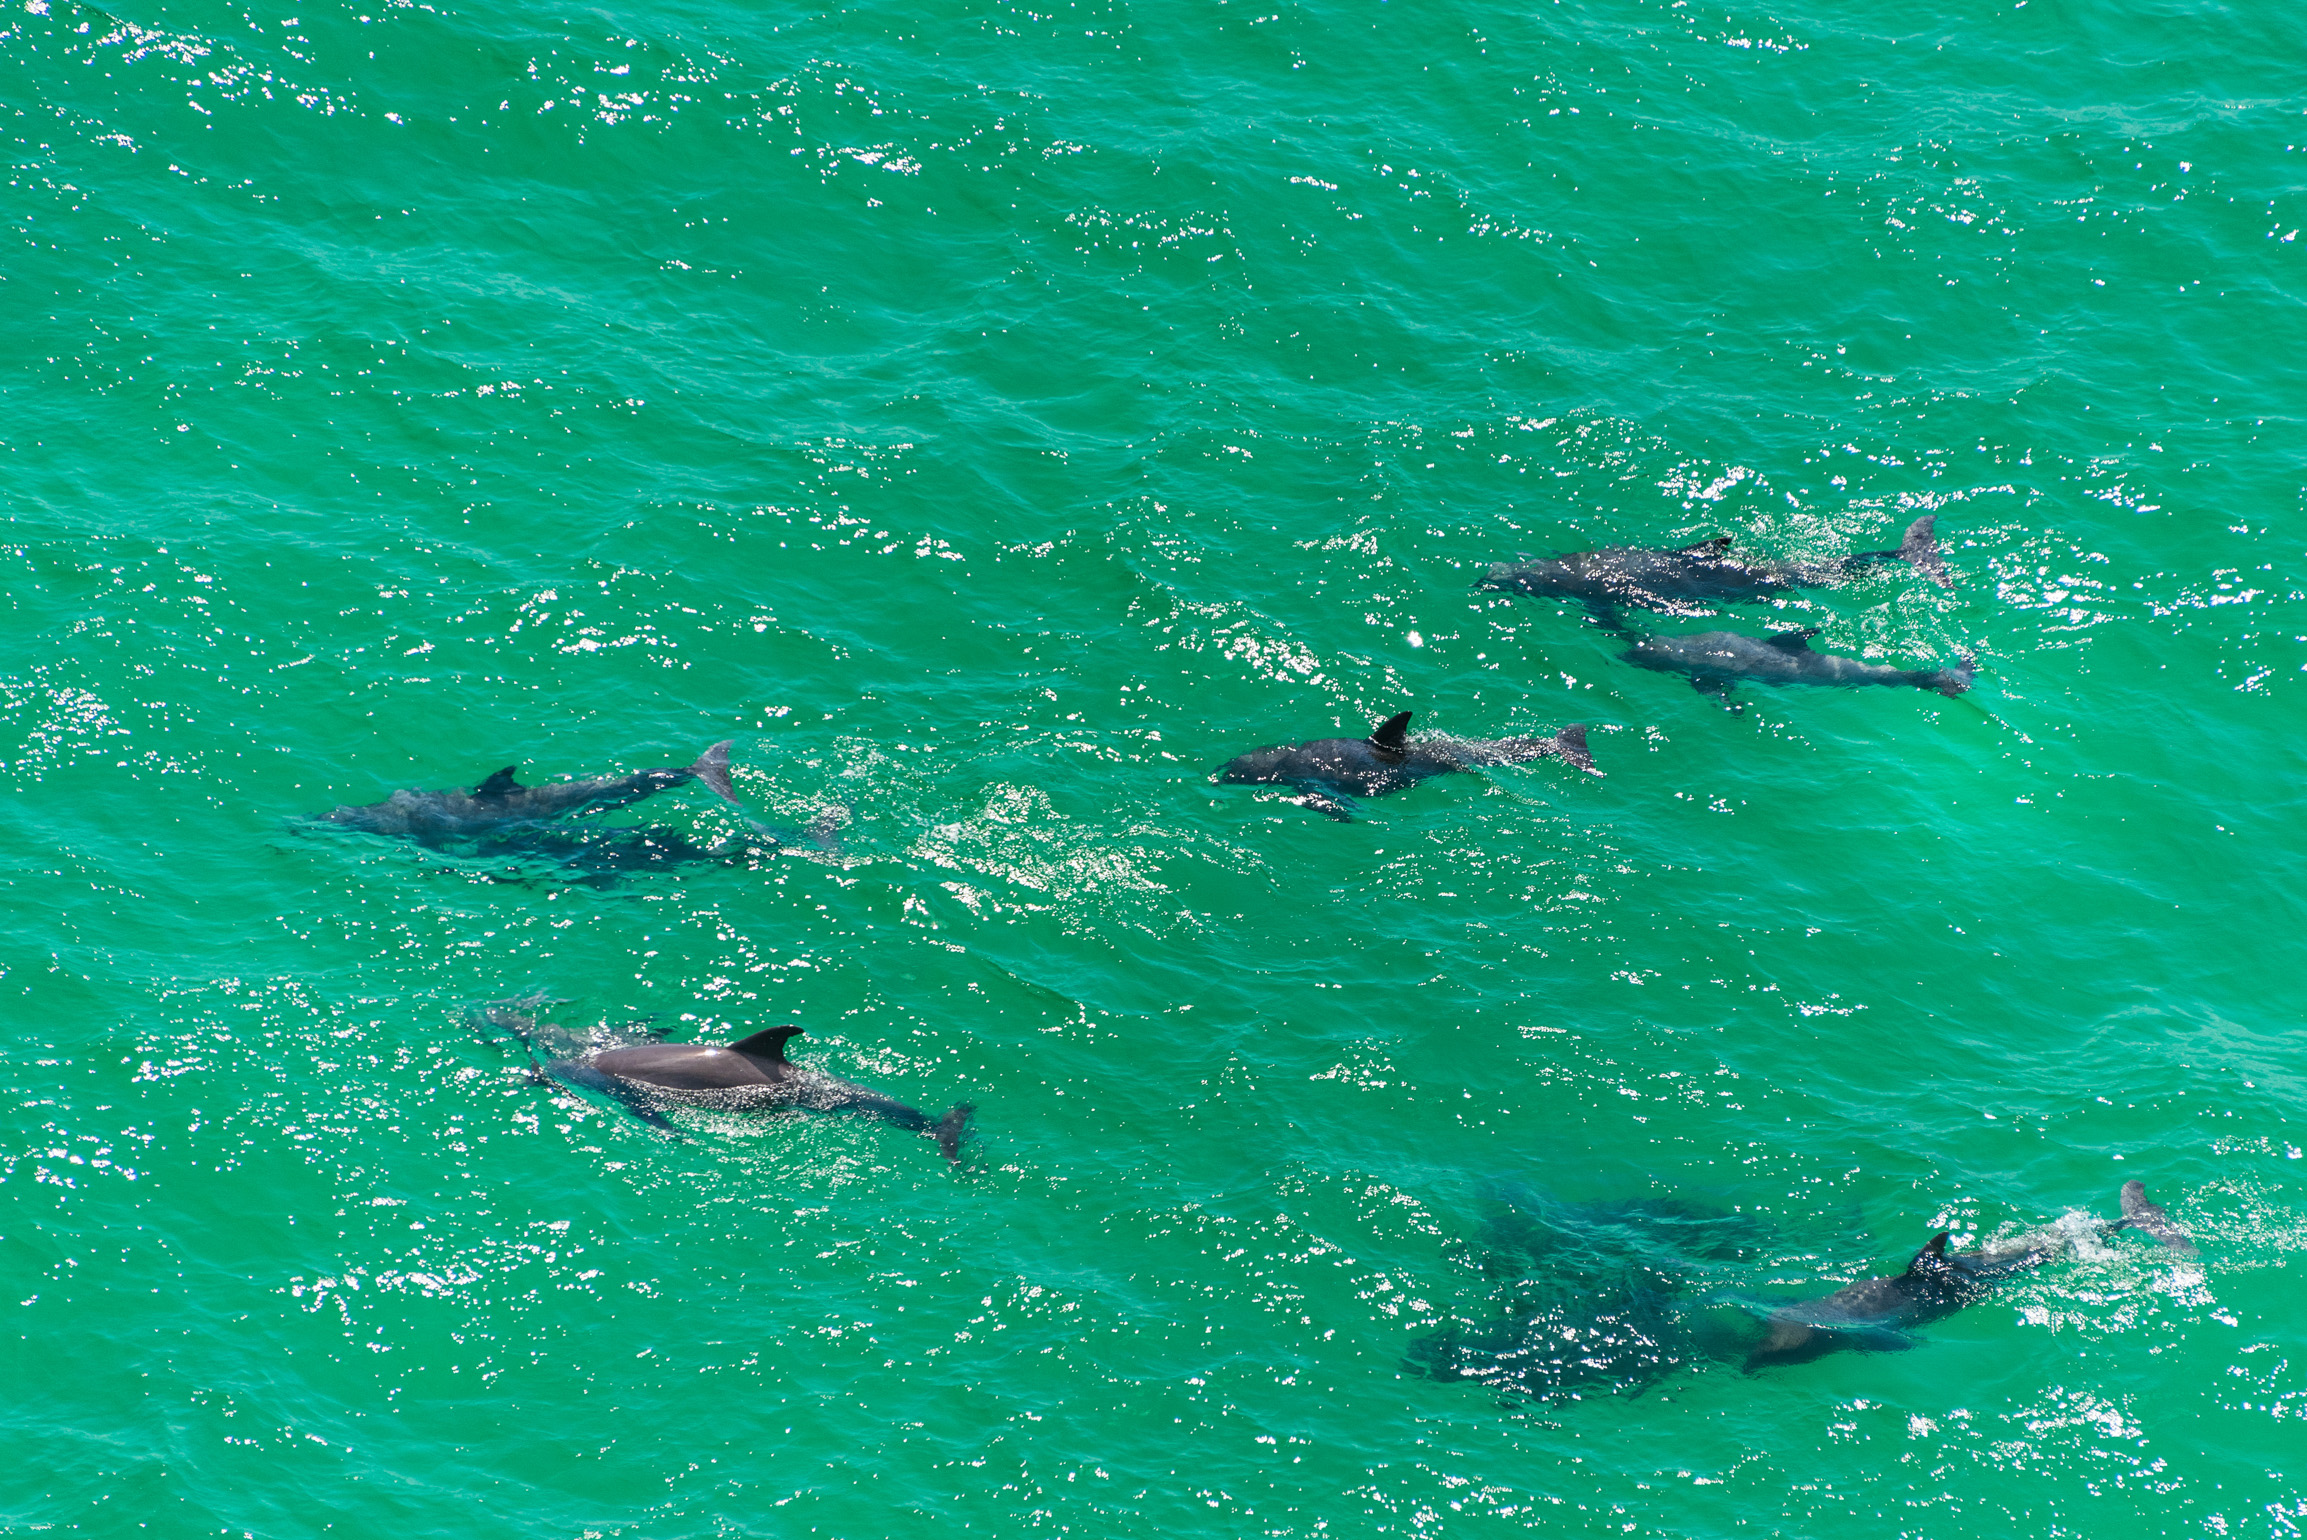 Dolphins at Play in our Emerald Waters